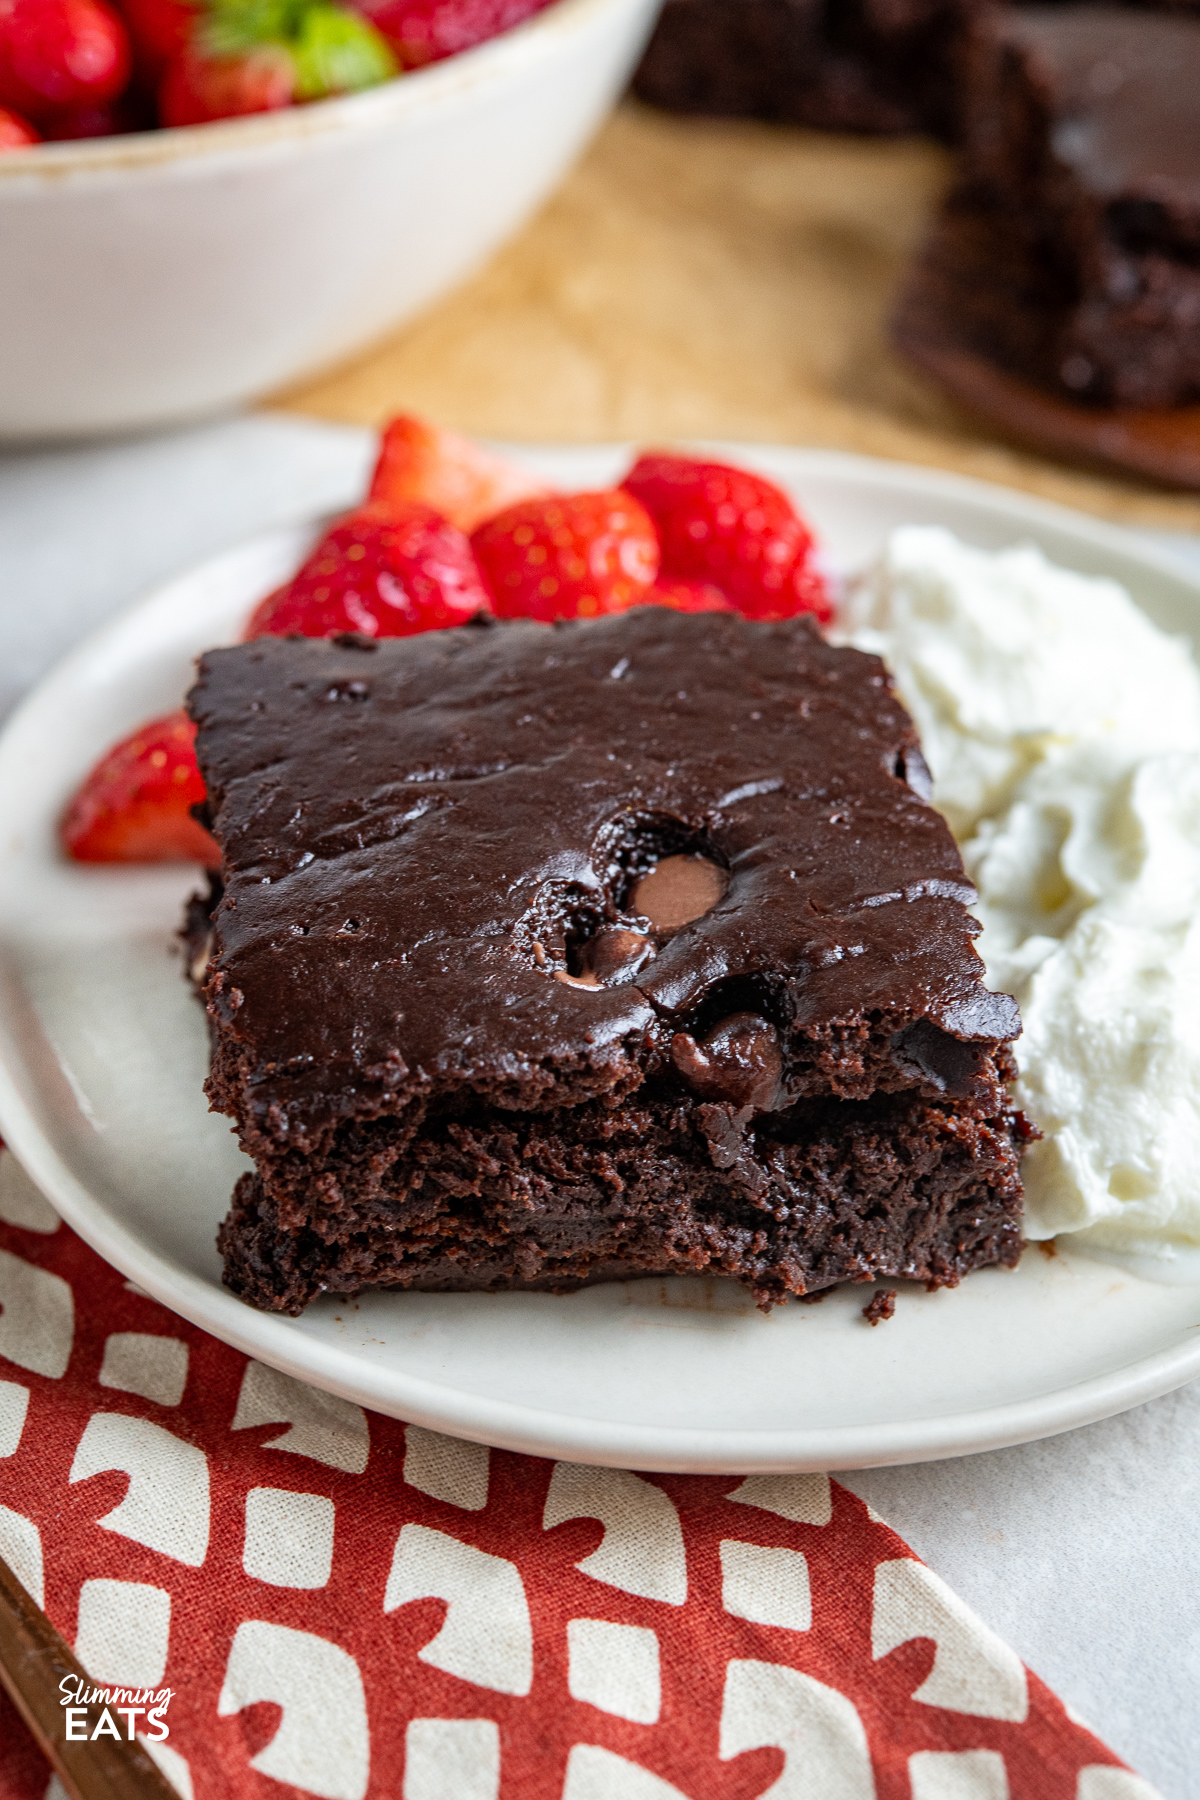 Slice of squidgy chocolate cake on a cream-colored plate, accompanied by aerosol cream and strawberries, with more cake and a bowl of strawberries visible in the background.